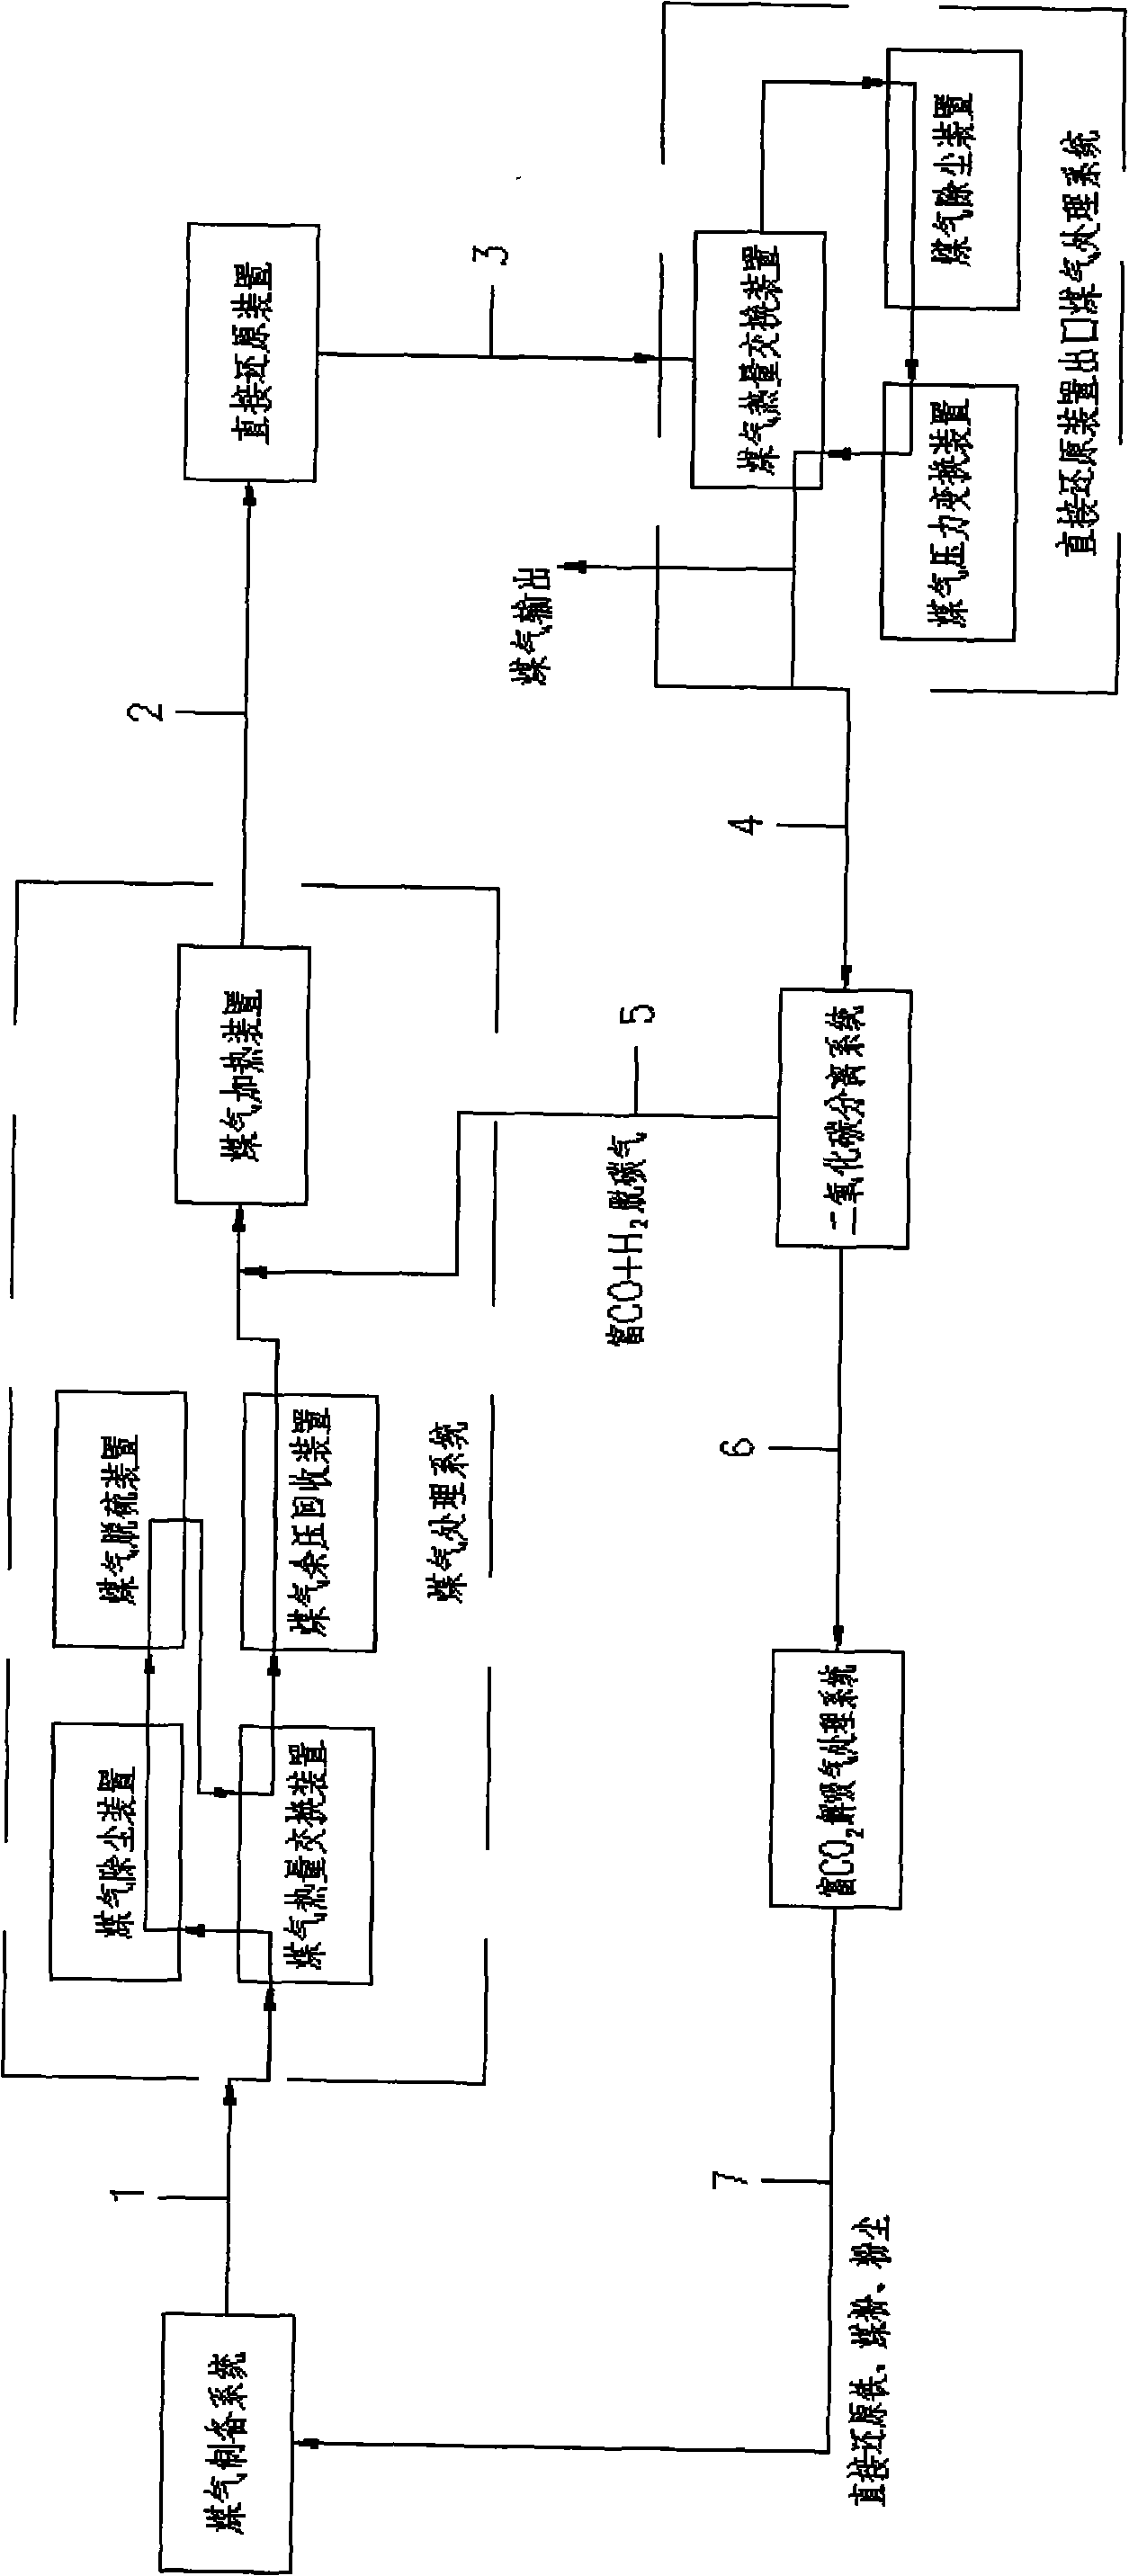 Recycling method of outlet gas in direct reduction process using gas as reducing gas